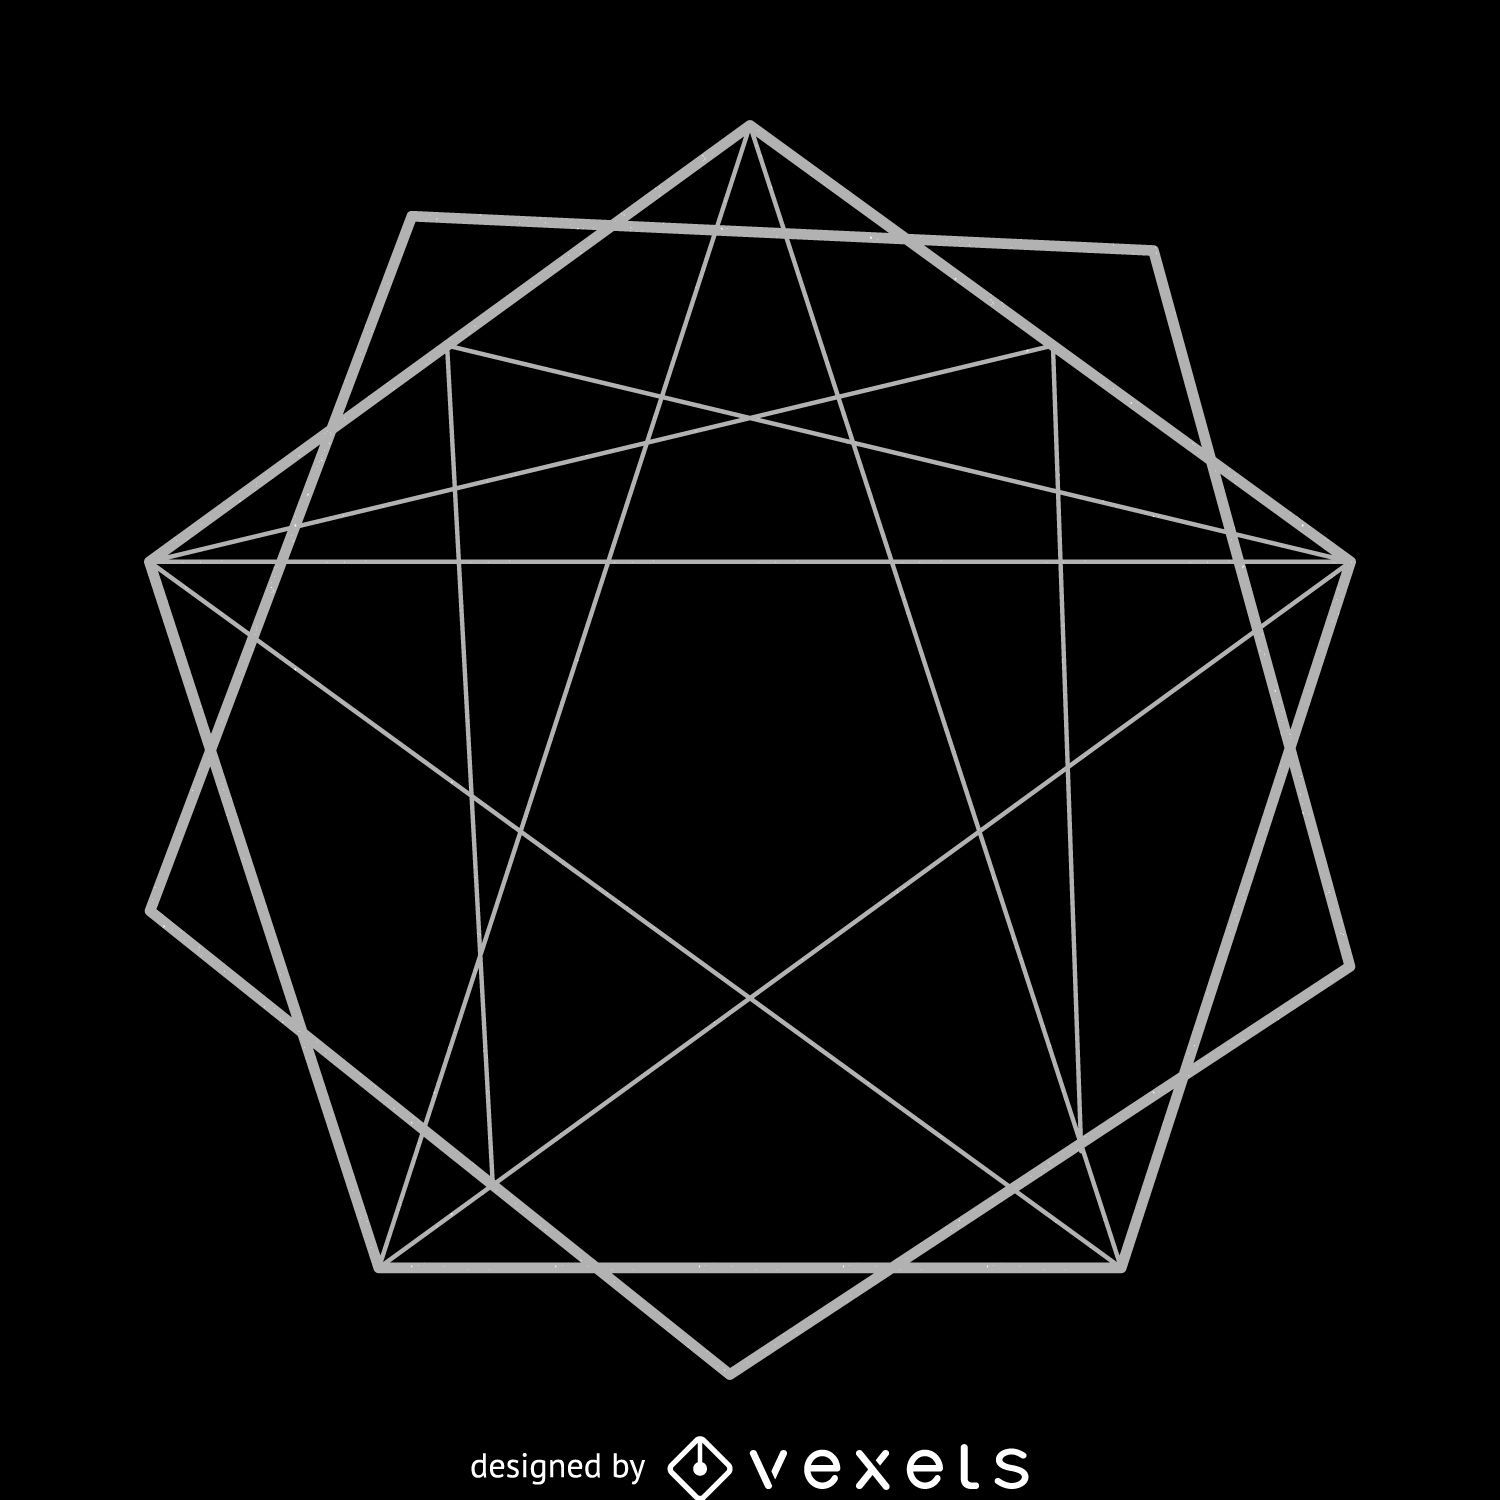 Abstract sacred geometry illustration design